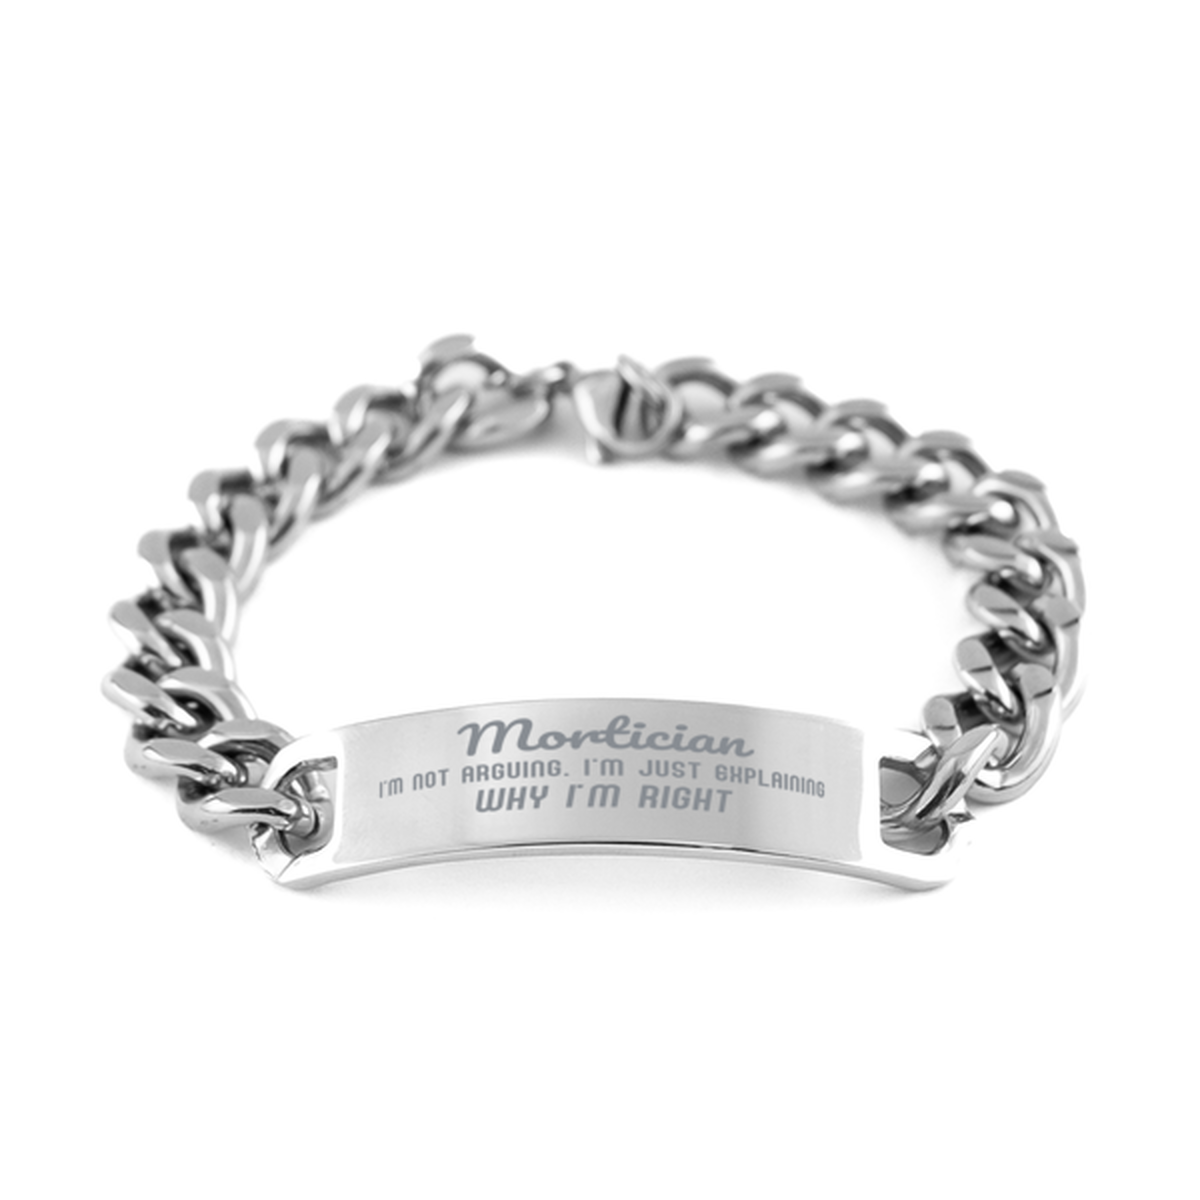 Mortician I'm not Arguing. I'm Just Explaining Why I'm RIGHT Cuban Chain Stainless Steel Bracelet, Graduation Birthday Christmas Mortician Gifts For Mortician Funny Saying Quote Present for Men Women Coworker